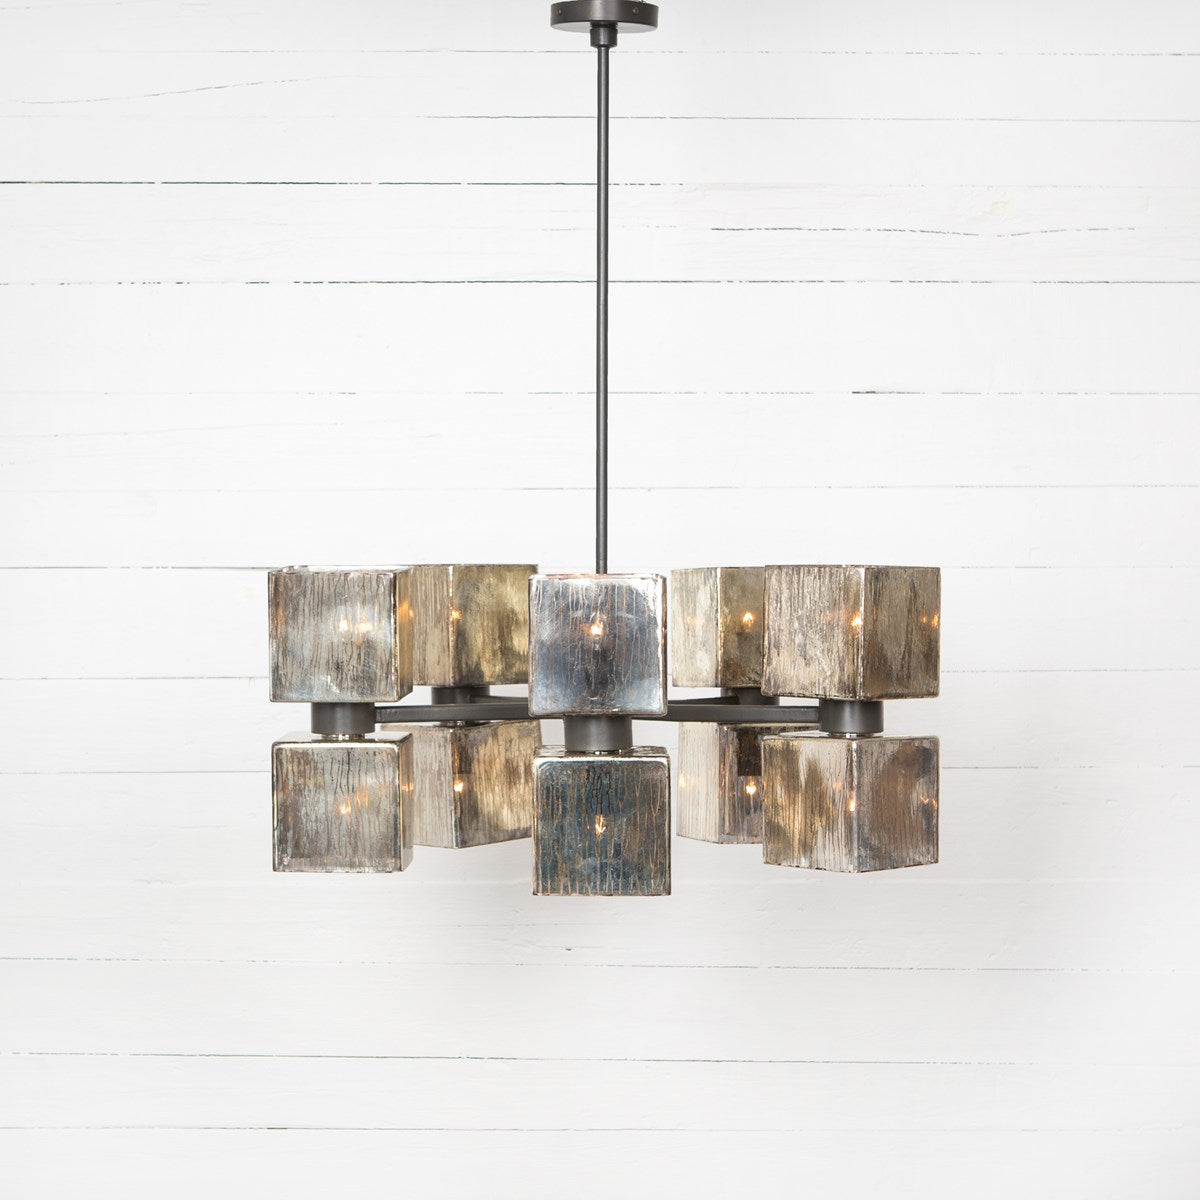 Load image into Gallery viewer, Ava Large Chandelier-Aged Metallic Glass Chandelier Four Hands     Four Hands, Burke Decor, Mid Century Modern Furniture, Old Bones Furniture Company, Old Bones Co, Modern Mid Century, Designer Furniture, https://www.oldbonesco.com/
